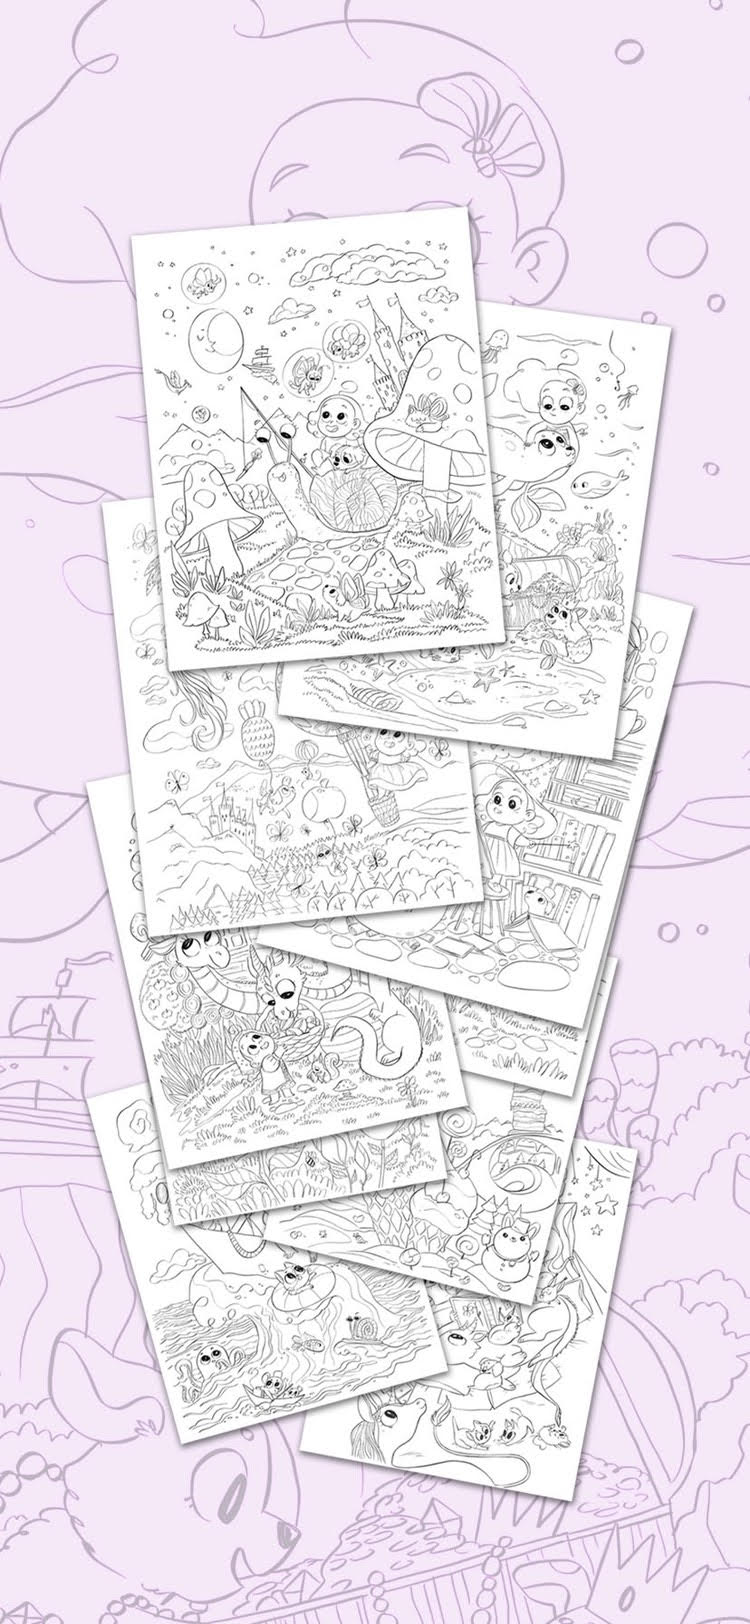 Another view of the ten coloring pages, piled on top of each other. The line drawings show various whimsical scenes.